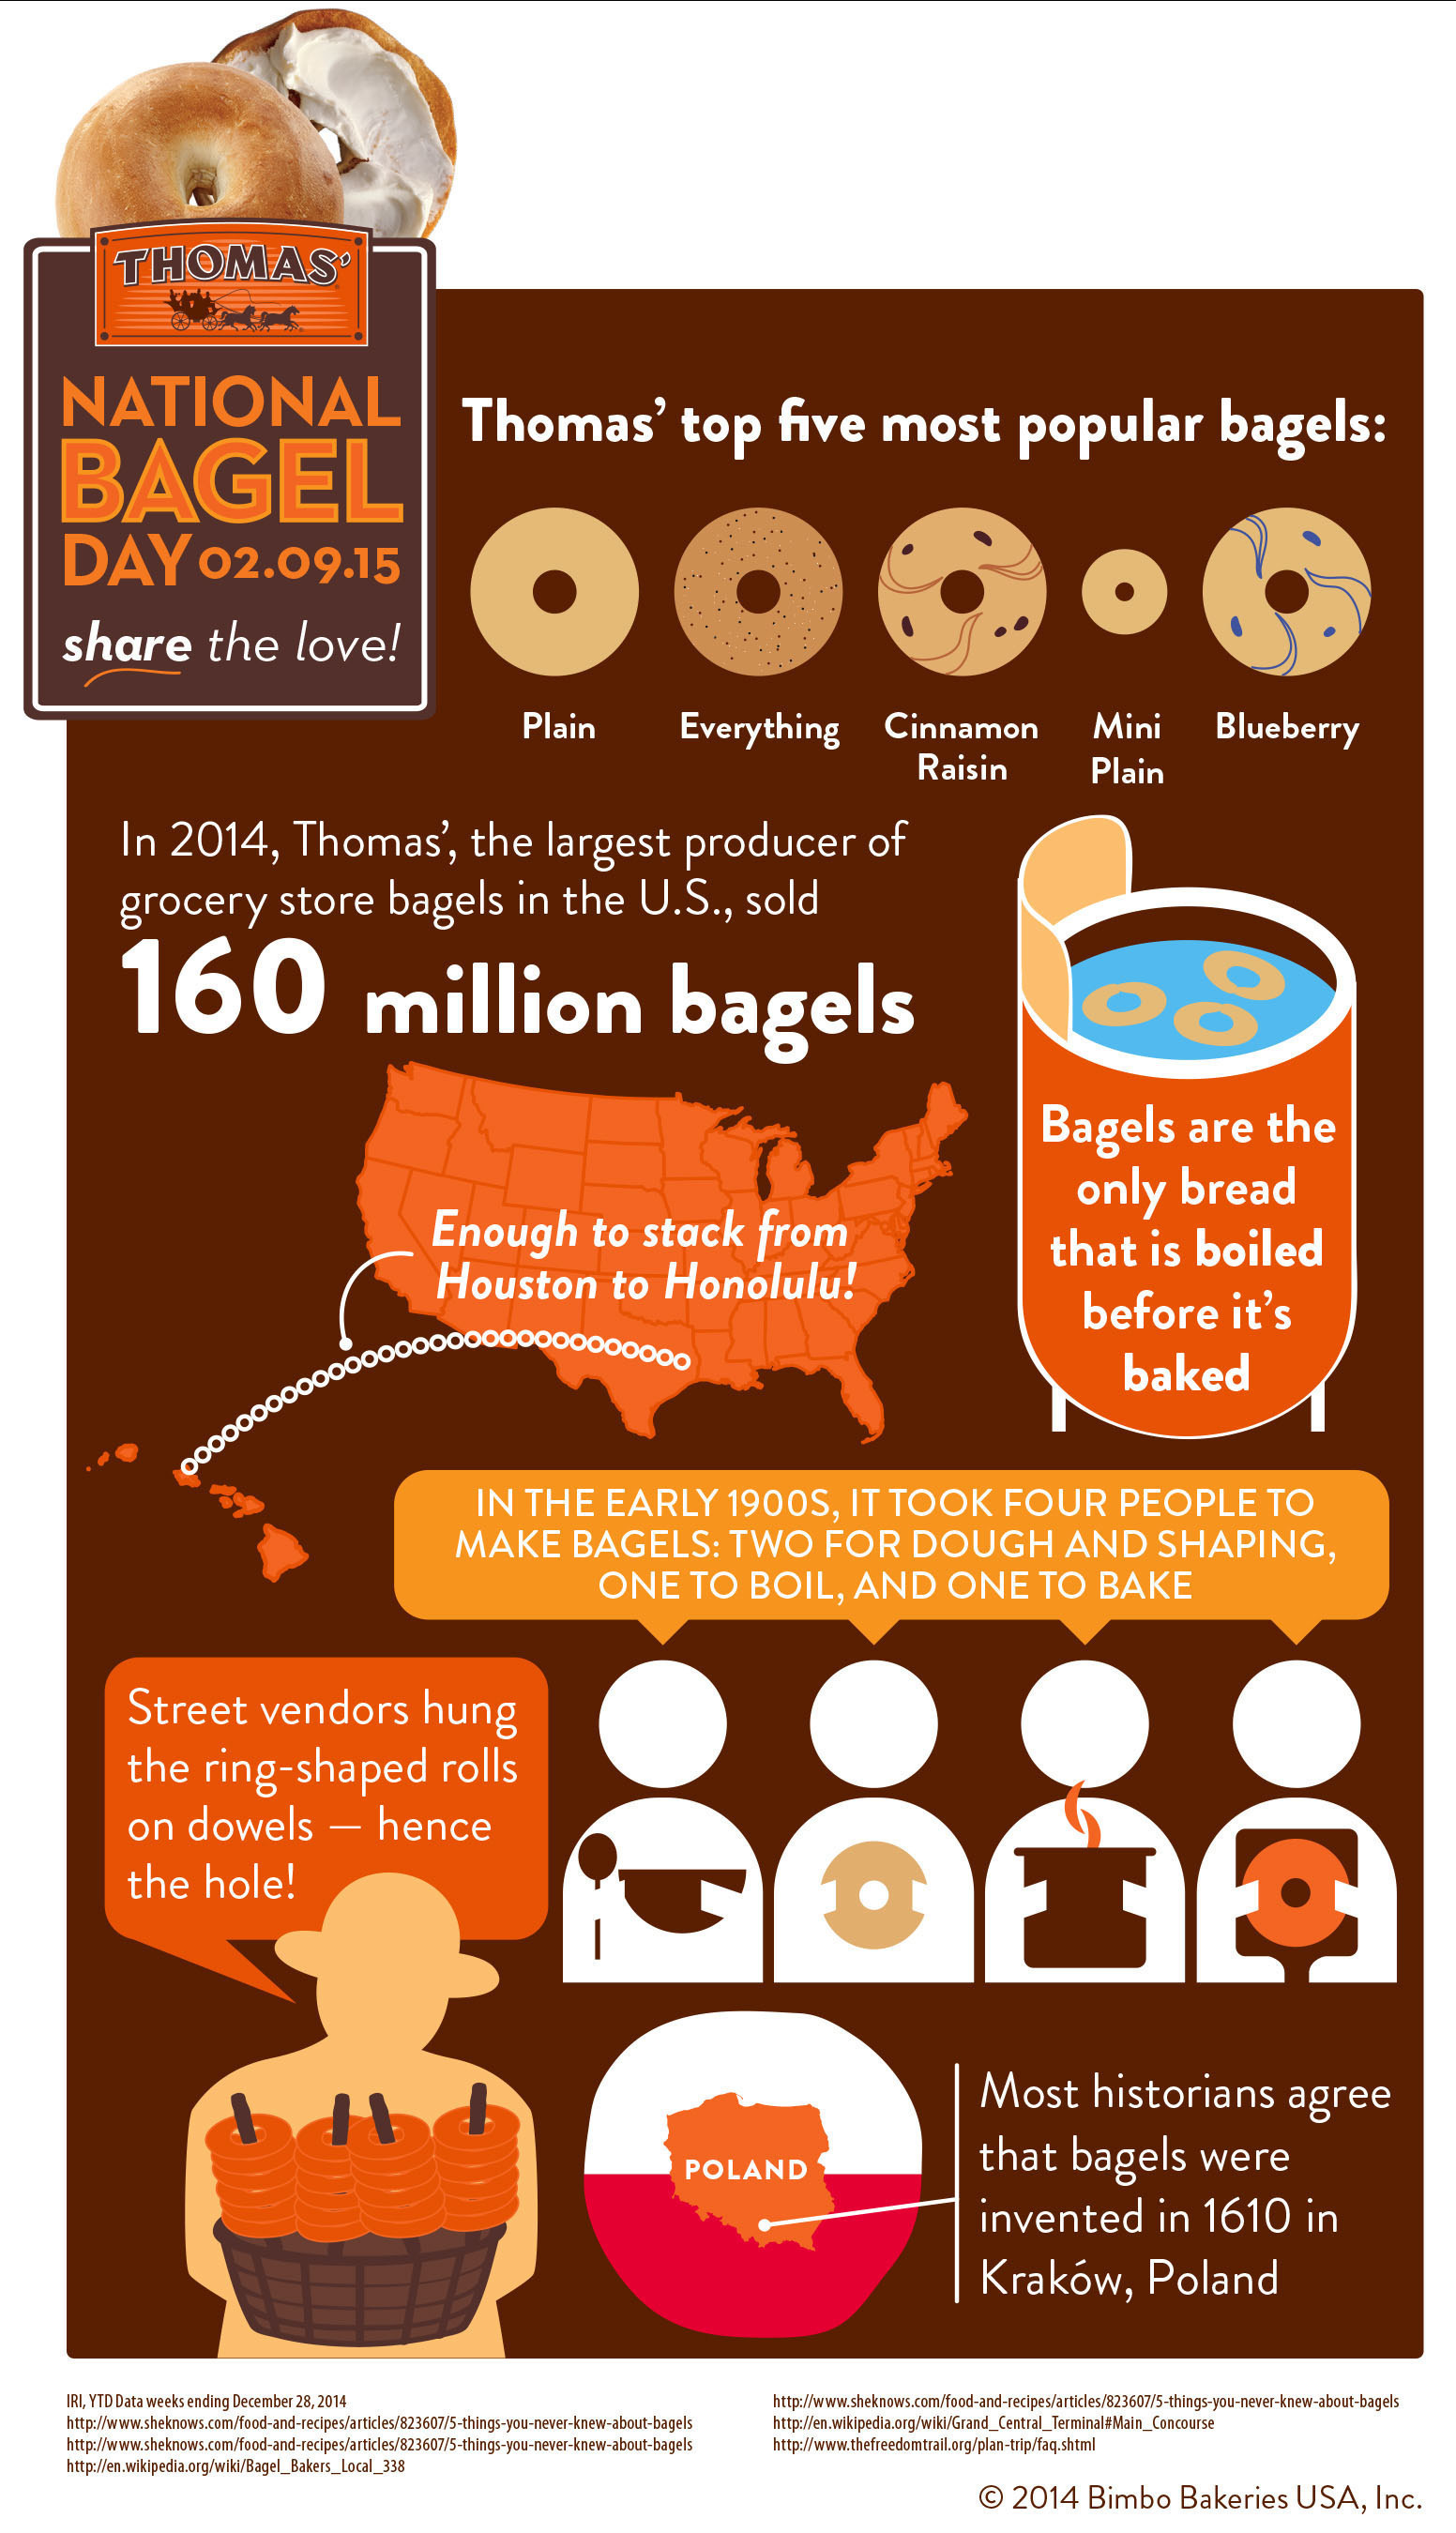 Thomas' Bagels Celebrates National Bagel Day with Illustrated Fun Facts